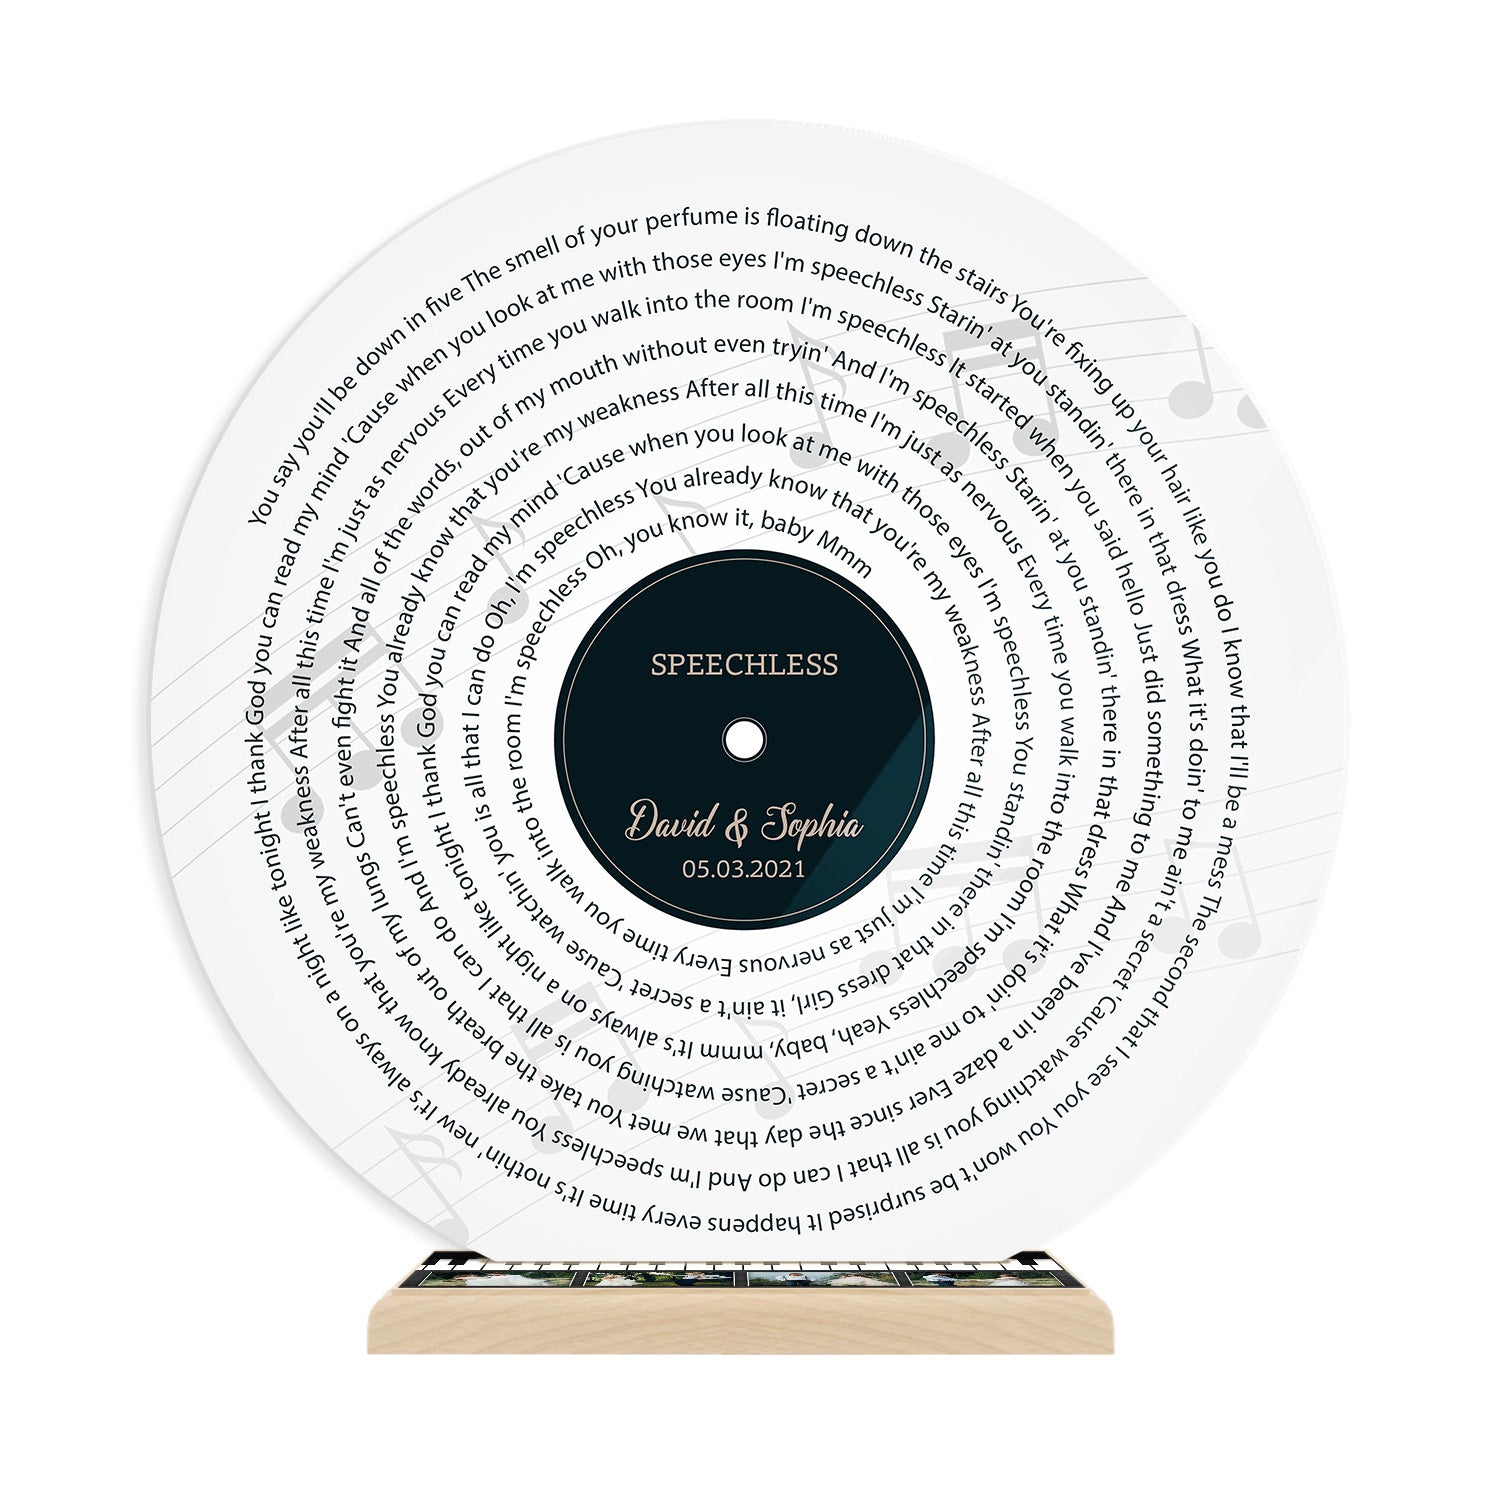 Personalized Vinyl Record Song with Lyrics on Acrylic with Wood Stand,  Mother's Day Gift for Her Personalized